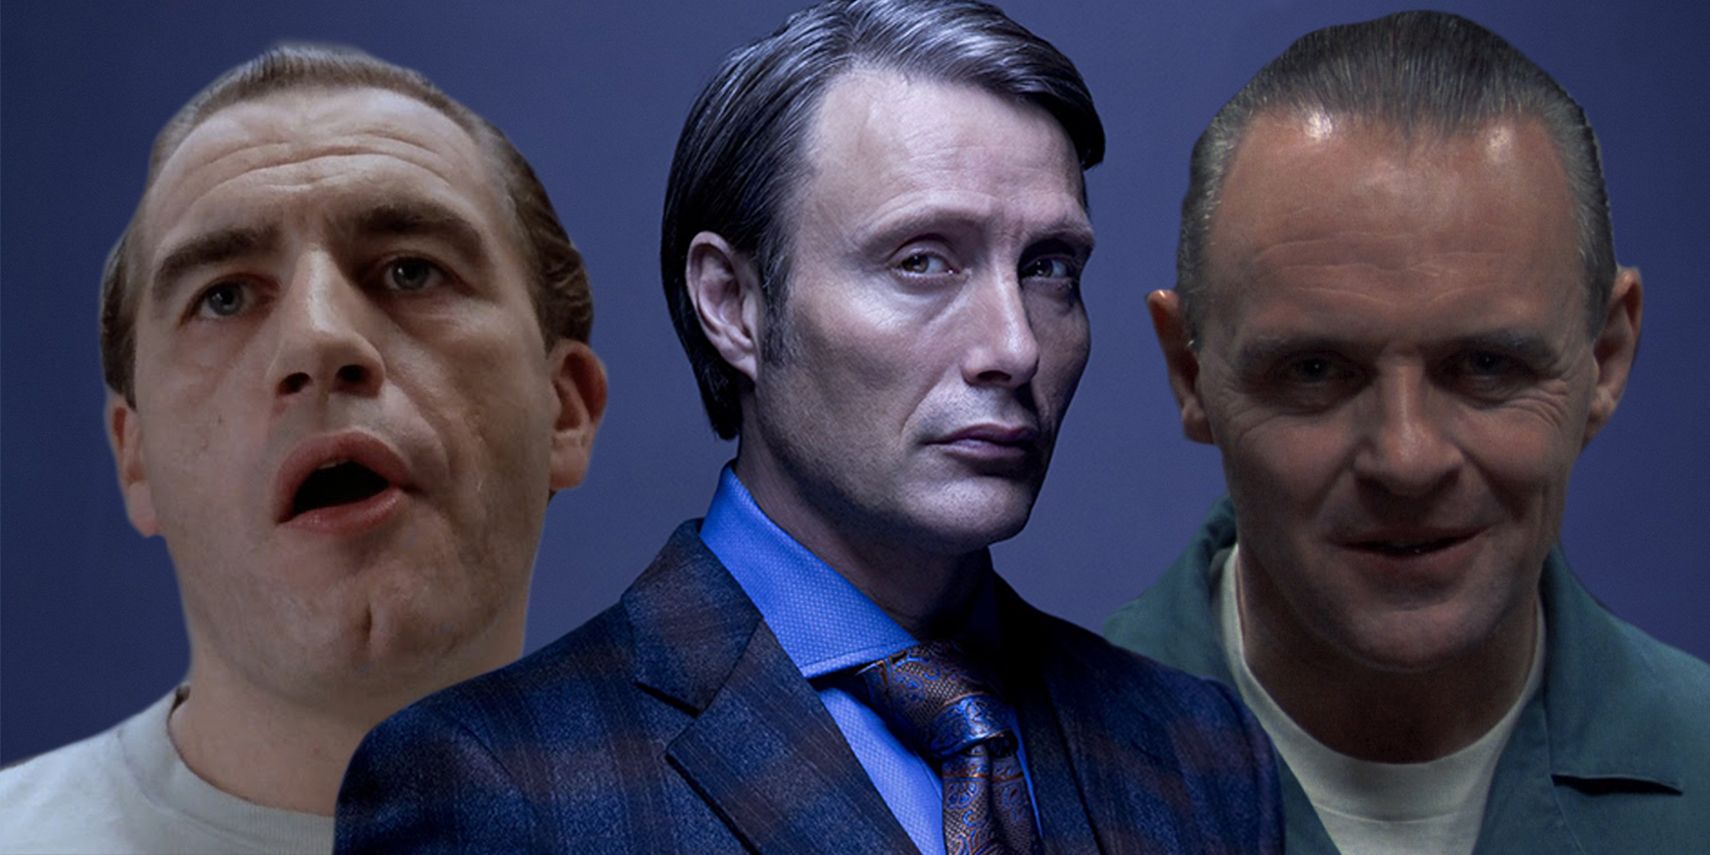 Hannibal: Comparing The 10 Main Characters With Their Movie Versions